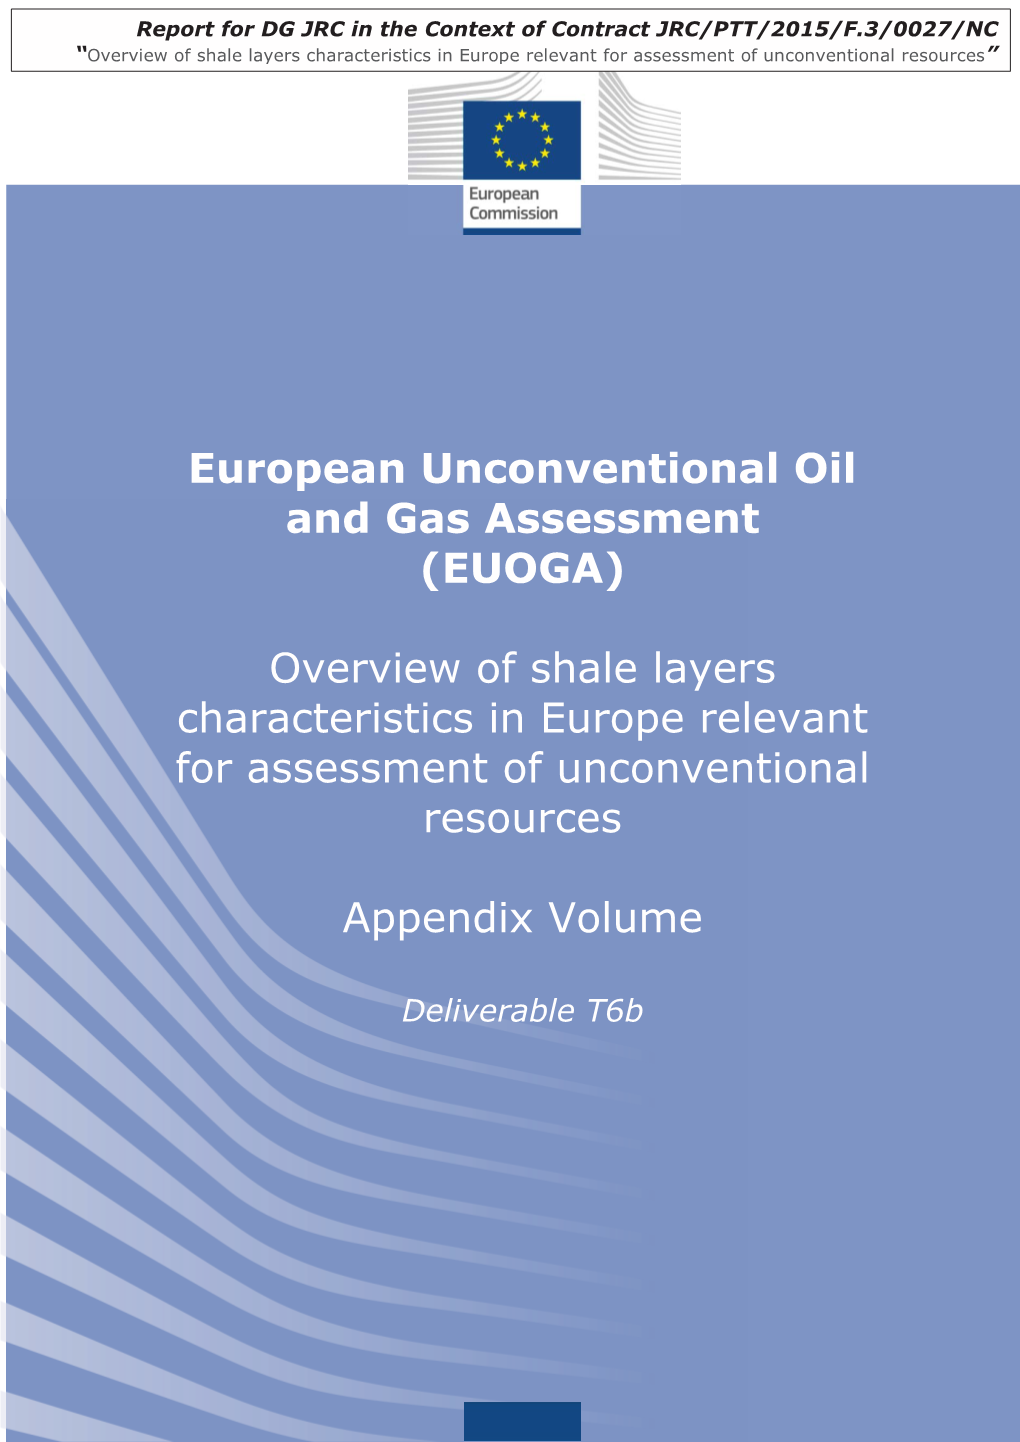 European Unconventional Oil and Gas Assessment (EUOGA)